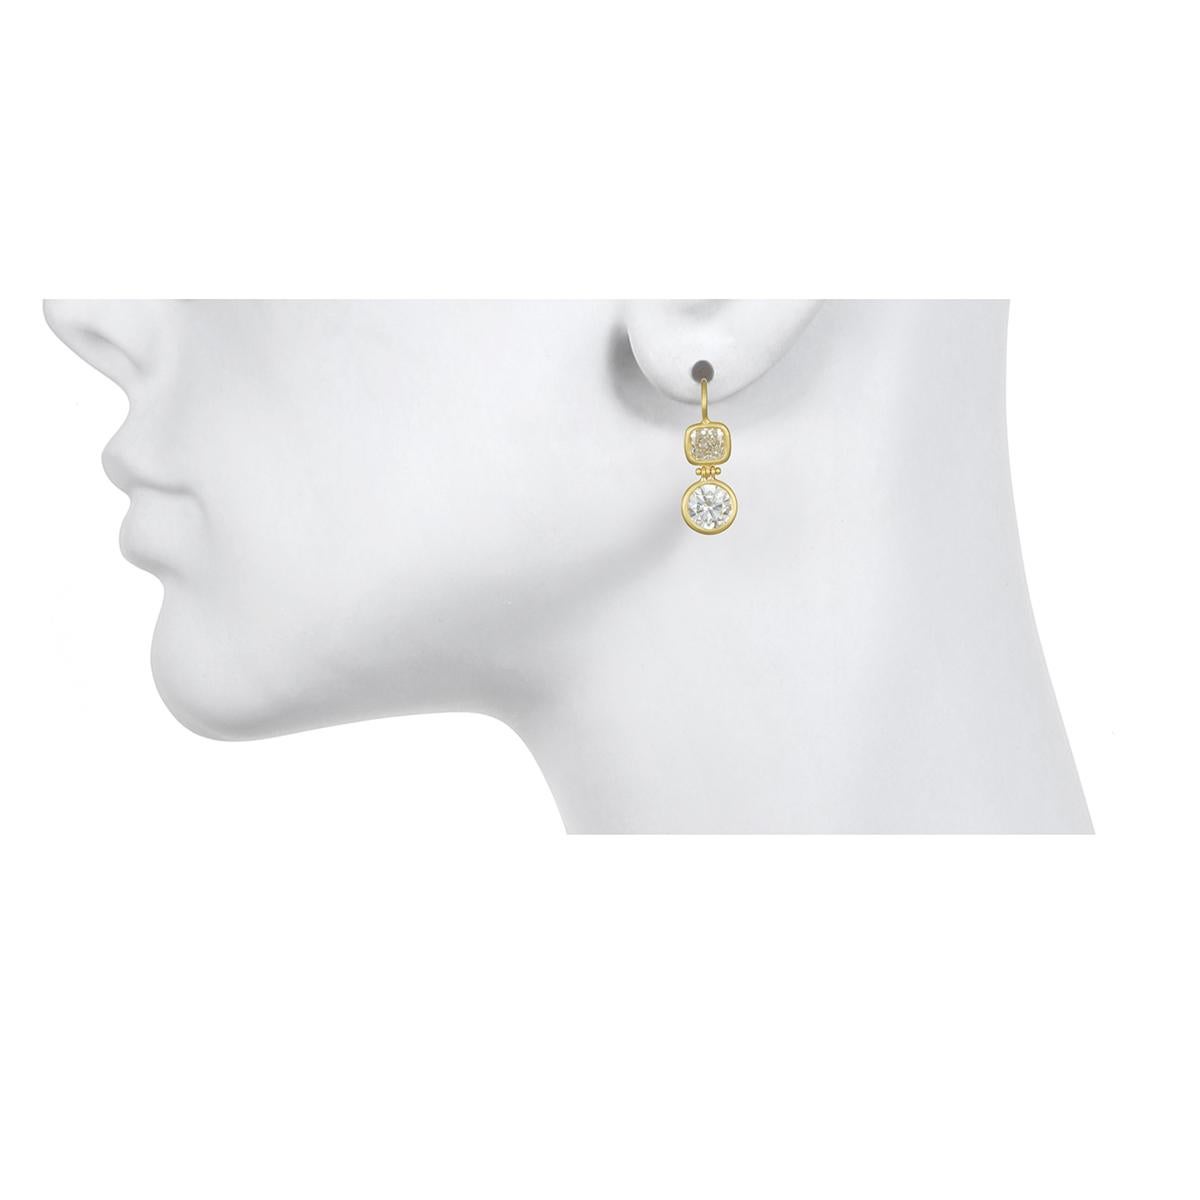 Faye Kim 18k Gold GIA Round and Cushion Shaped Diamond Drop Earrings

An extraordinary pair of diamond earrings from Faye Kim.  Cushion cut diamonds are hinged above round diamonds for a striking contrast.  Bezel set in 18k matte gold.  

Diamonds =